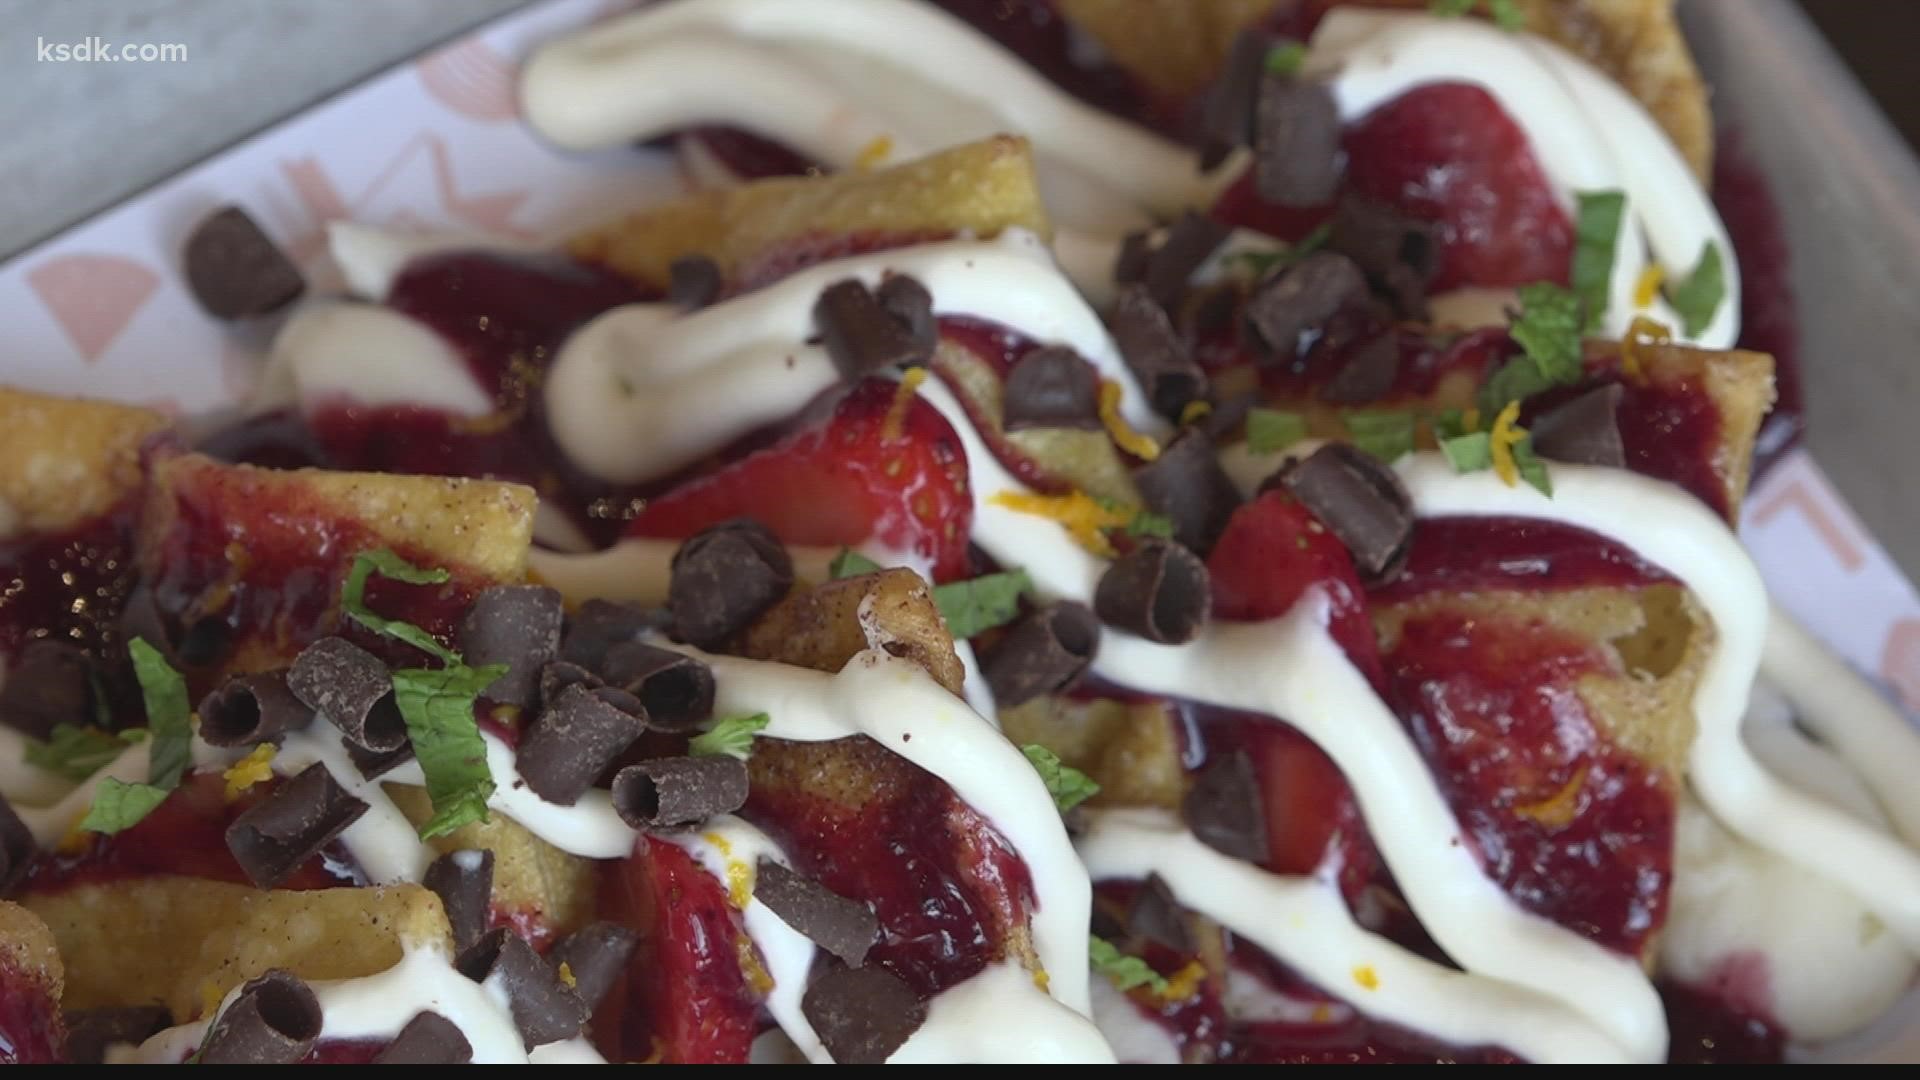 Loaded Elevated Nachos can be found at the Streets of St. Charles.